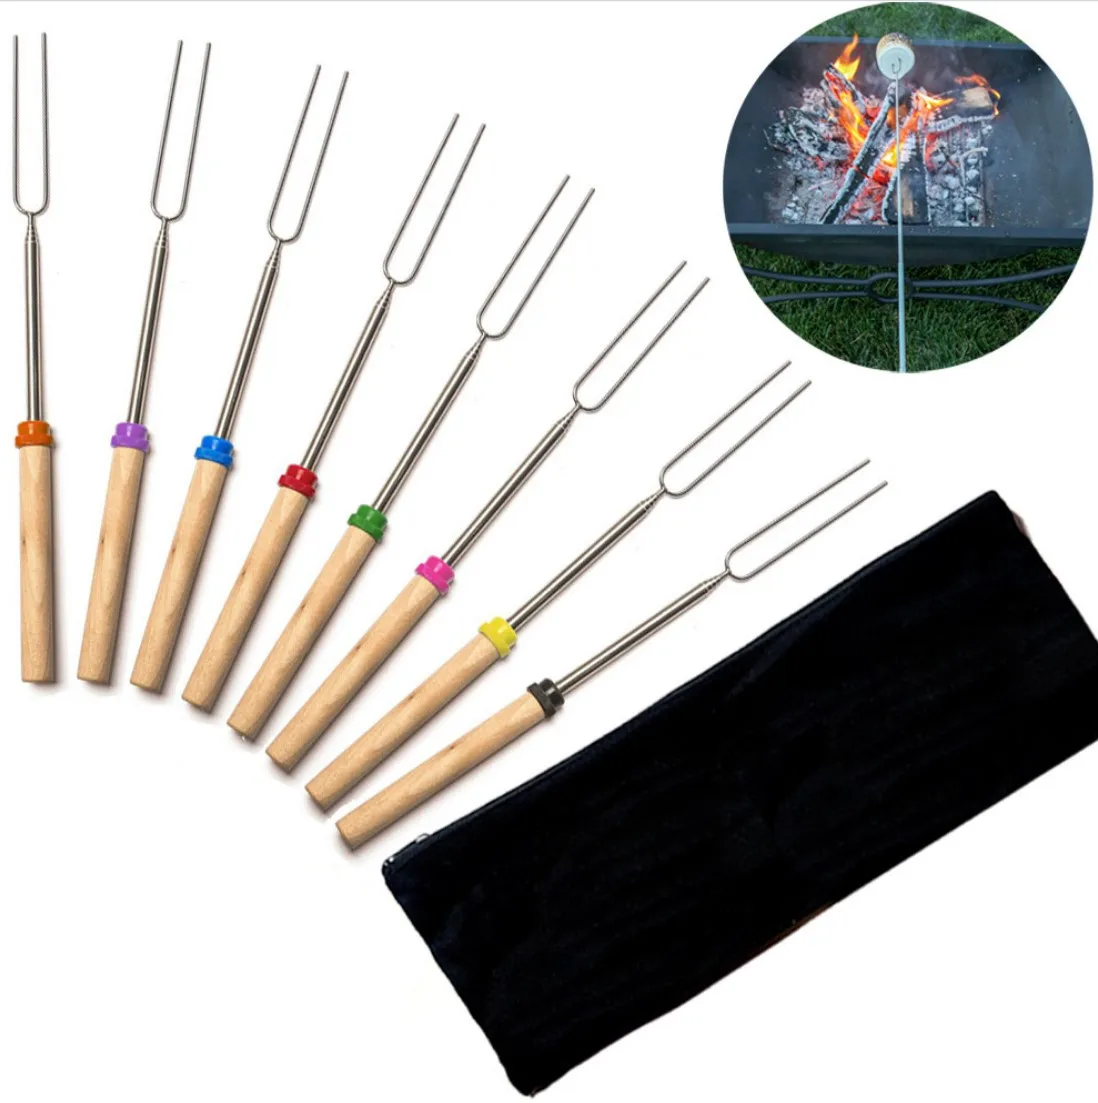 

BBQ Tool Stainless Steel BBQ Sticks Extendable Forks with Wooden Handle Campfire Roasting Sticks